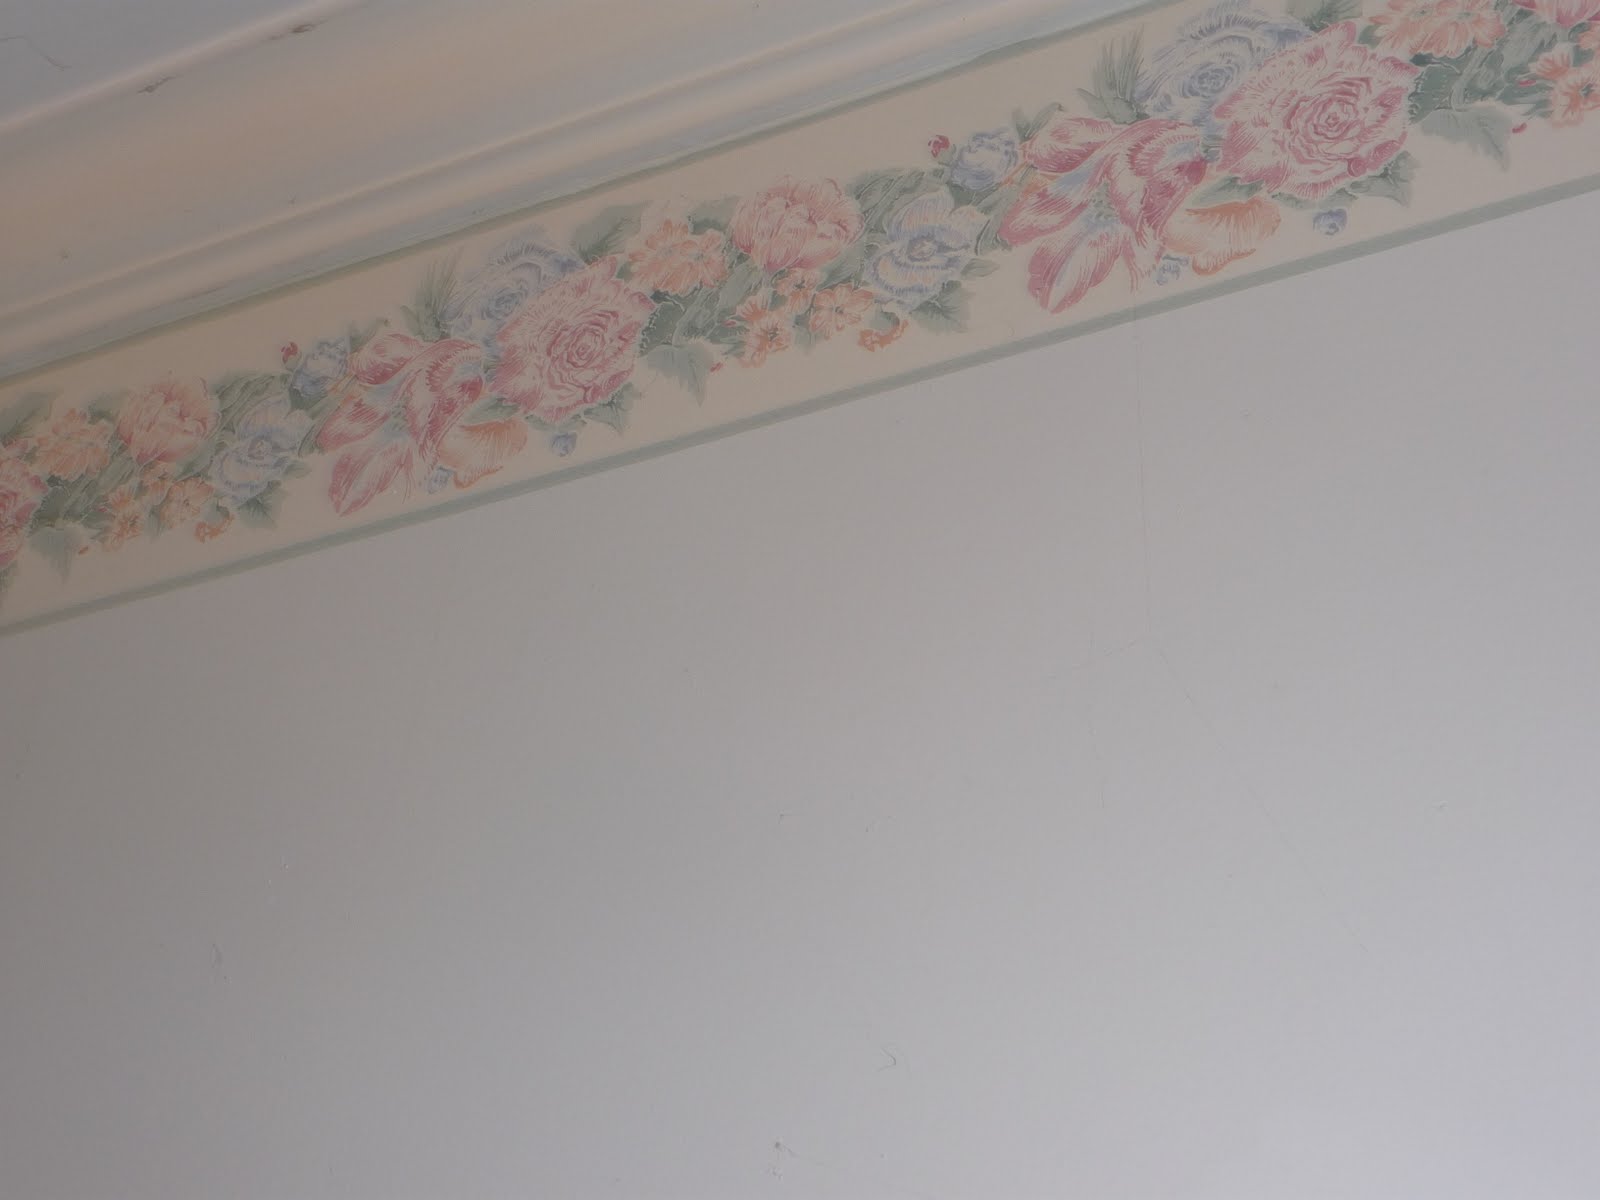 Holy wallpaper border batman - looks what's beautifying our master ...